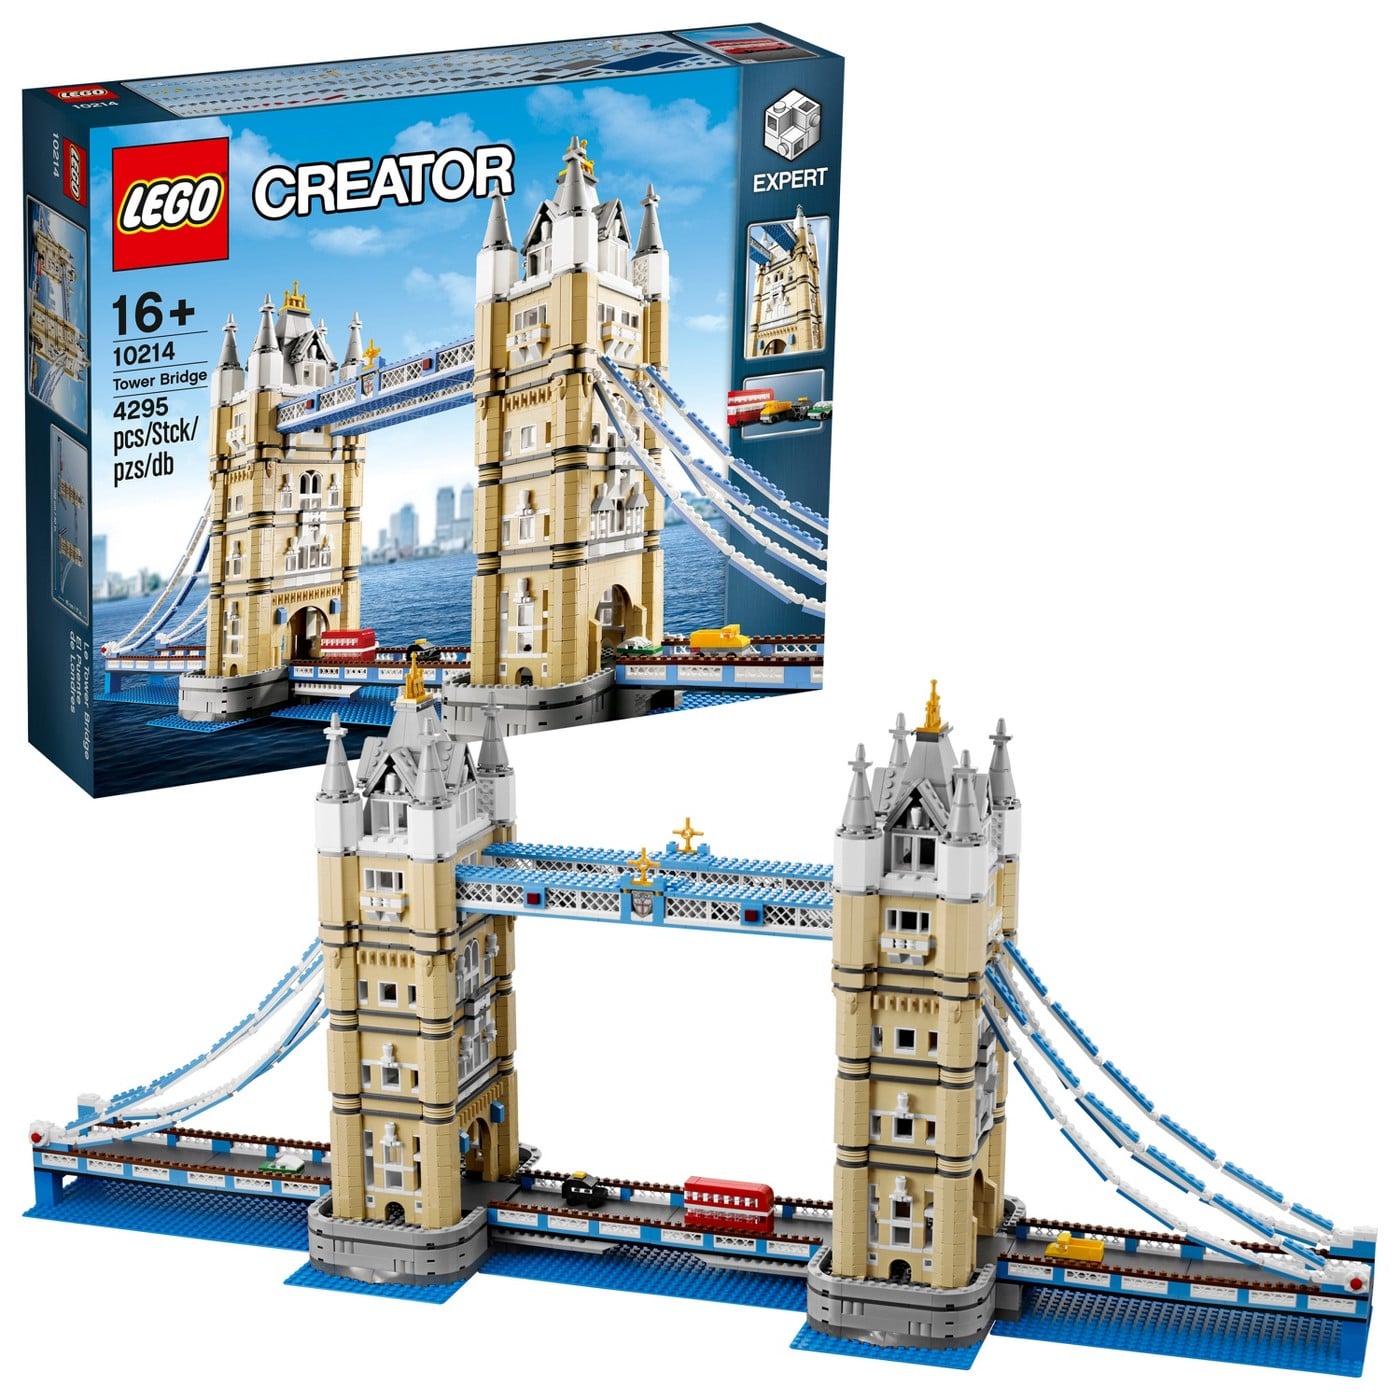 Tower Bridge | These Huge Lego Sets Will Keep Your Busy For an Entire Weekend (aka Dream) | POPSUGAR Family Photo 7